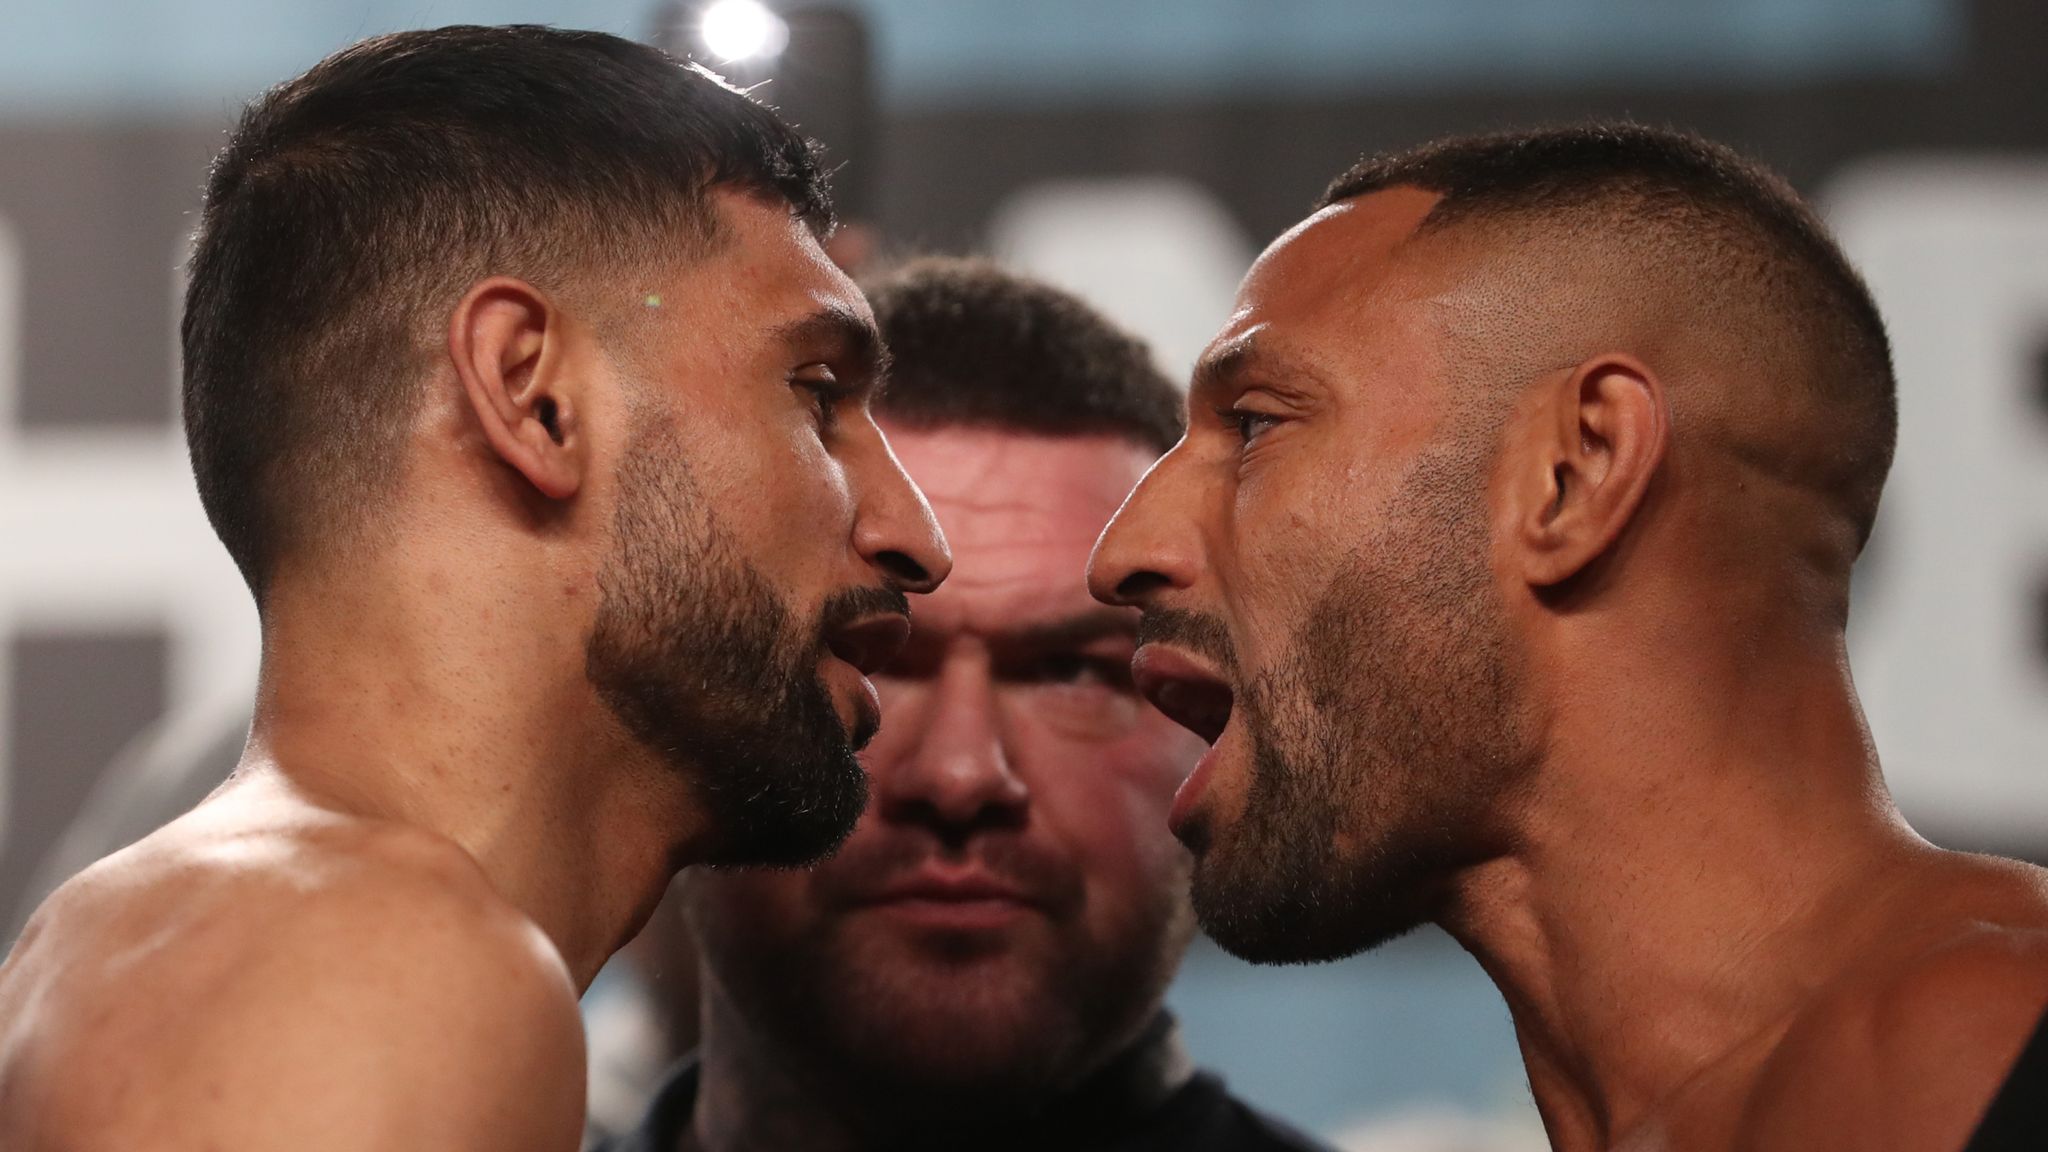 Amir Khan vs Kell Brook was nearly cancelled amid a backstage row over gloves